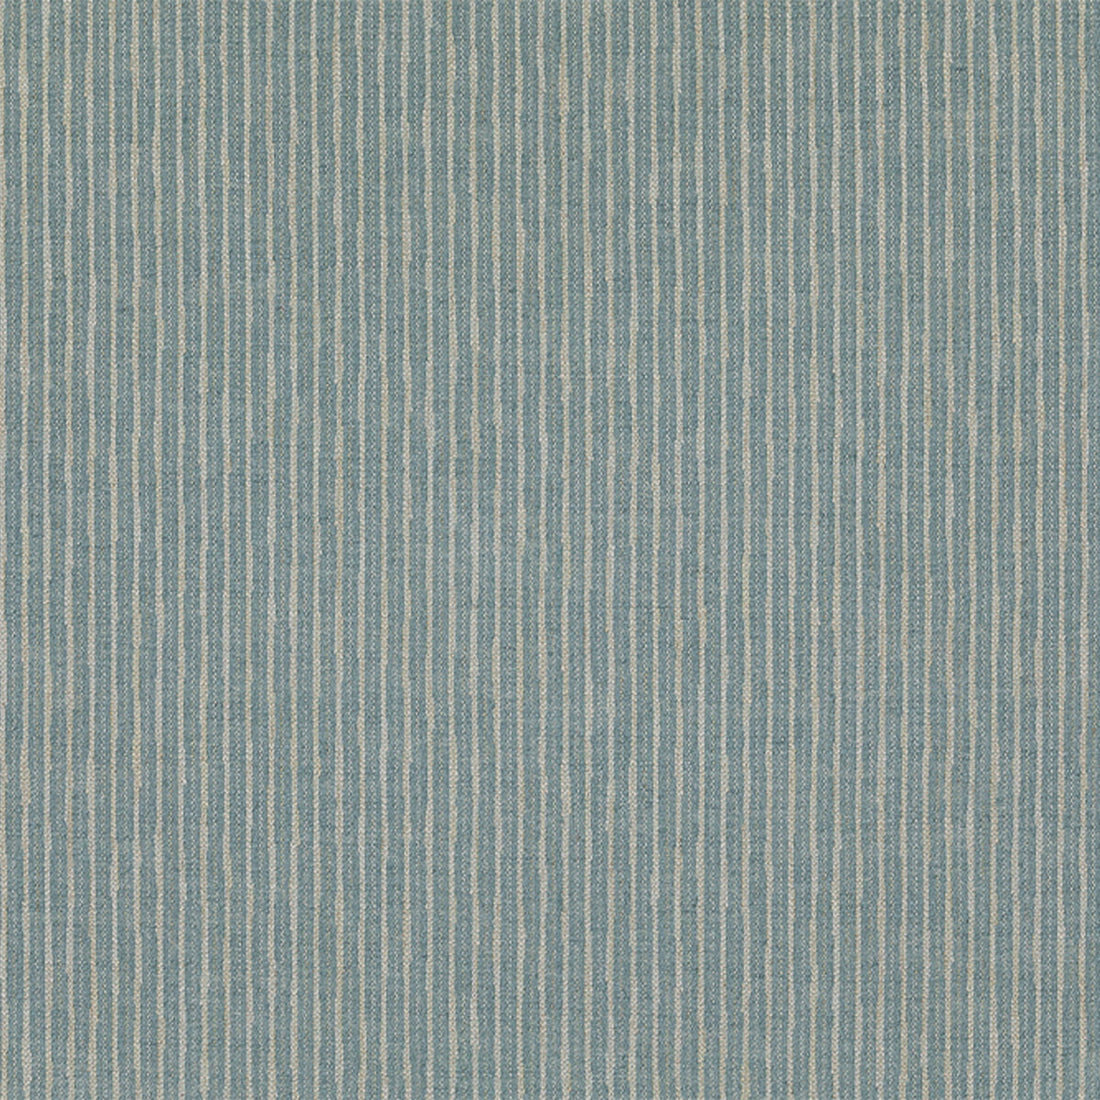 Bailey fabric in blue color - pattern BFC-3700.5.0 - by Lee Jofa in the Blithfield collection